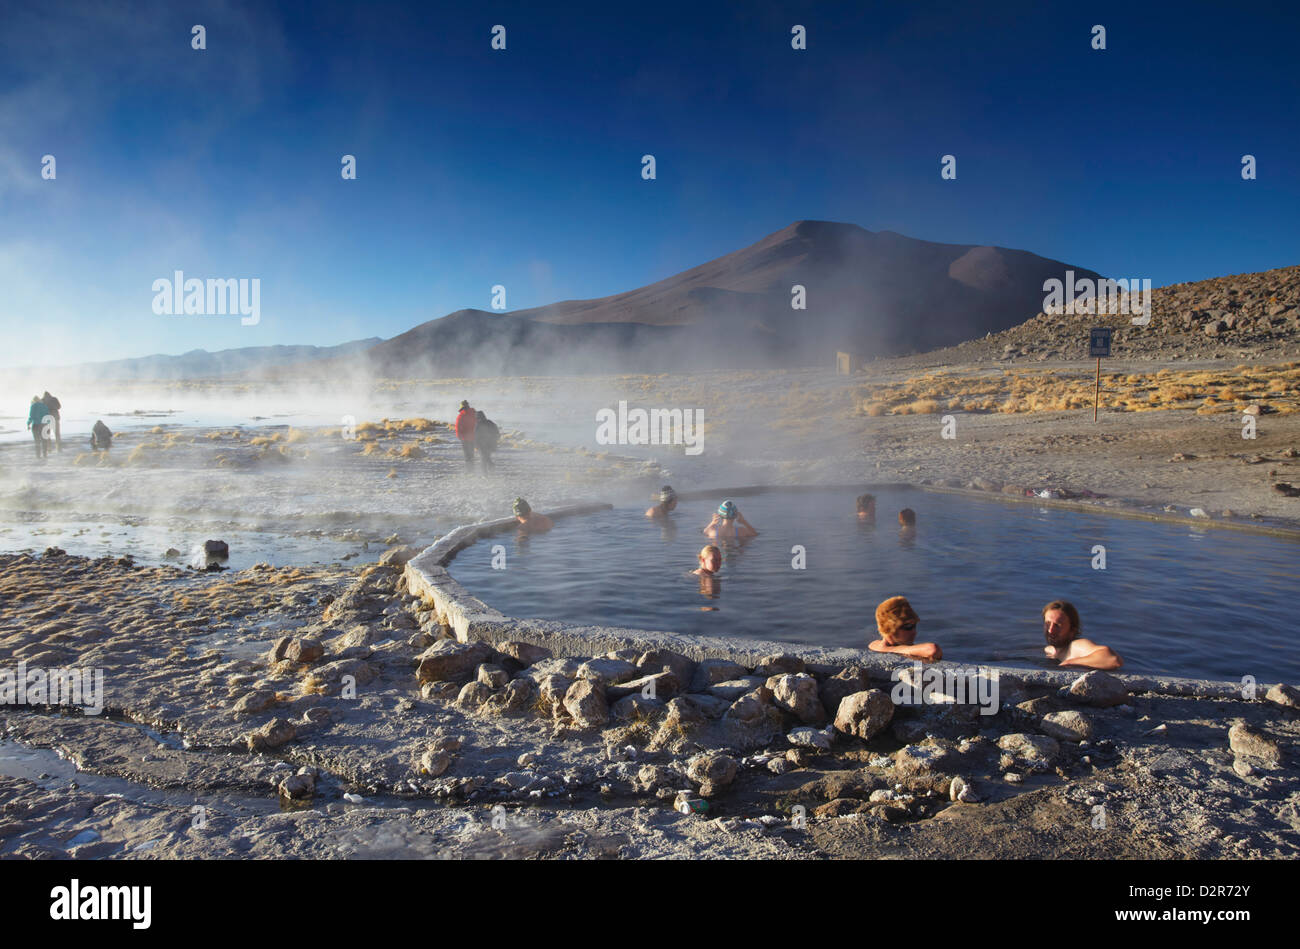 Tourists in hot springs of Termas de Polques on the Altiplano, Potosi Department, Bolivia, South America Stock Photo